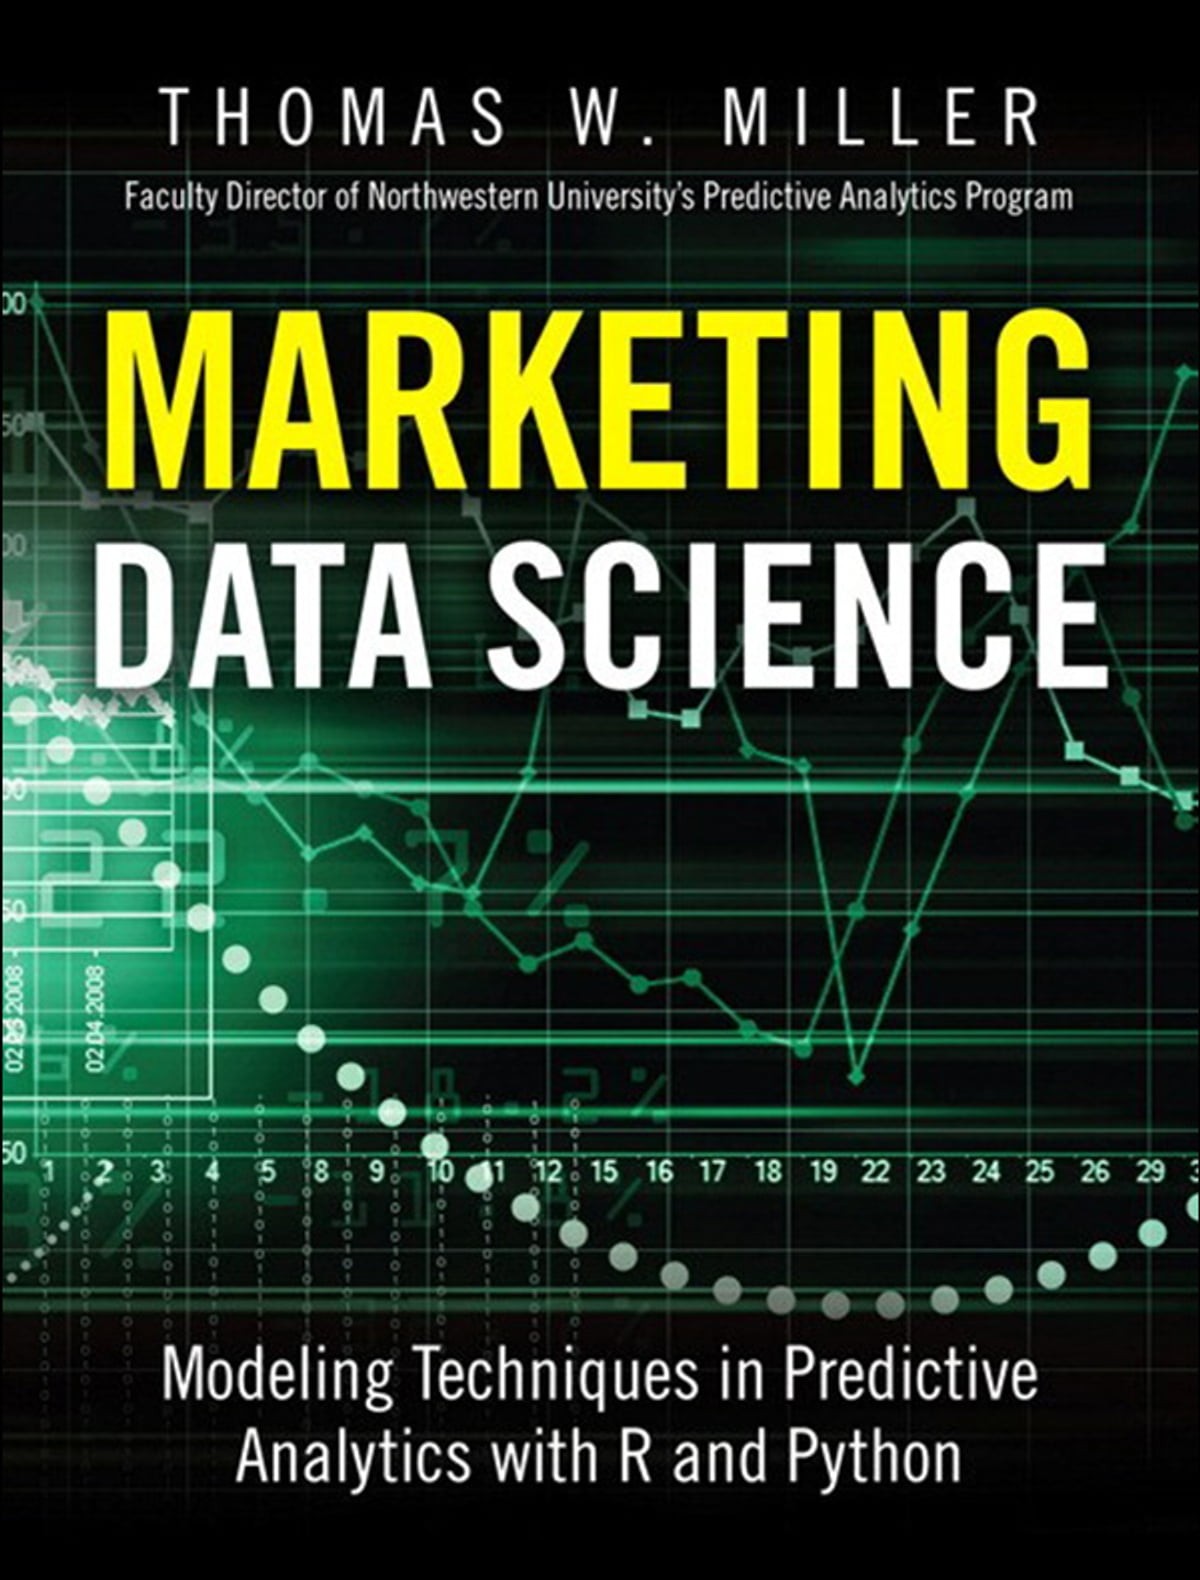 Marketing Data Science: Modeling Techniques in Predictive Analytics with Python and R